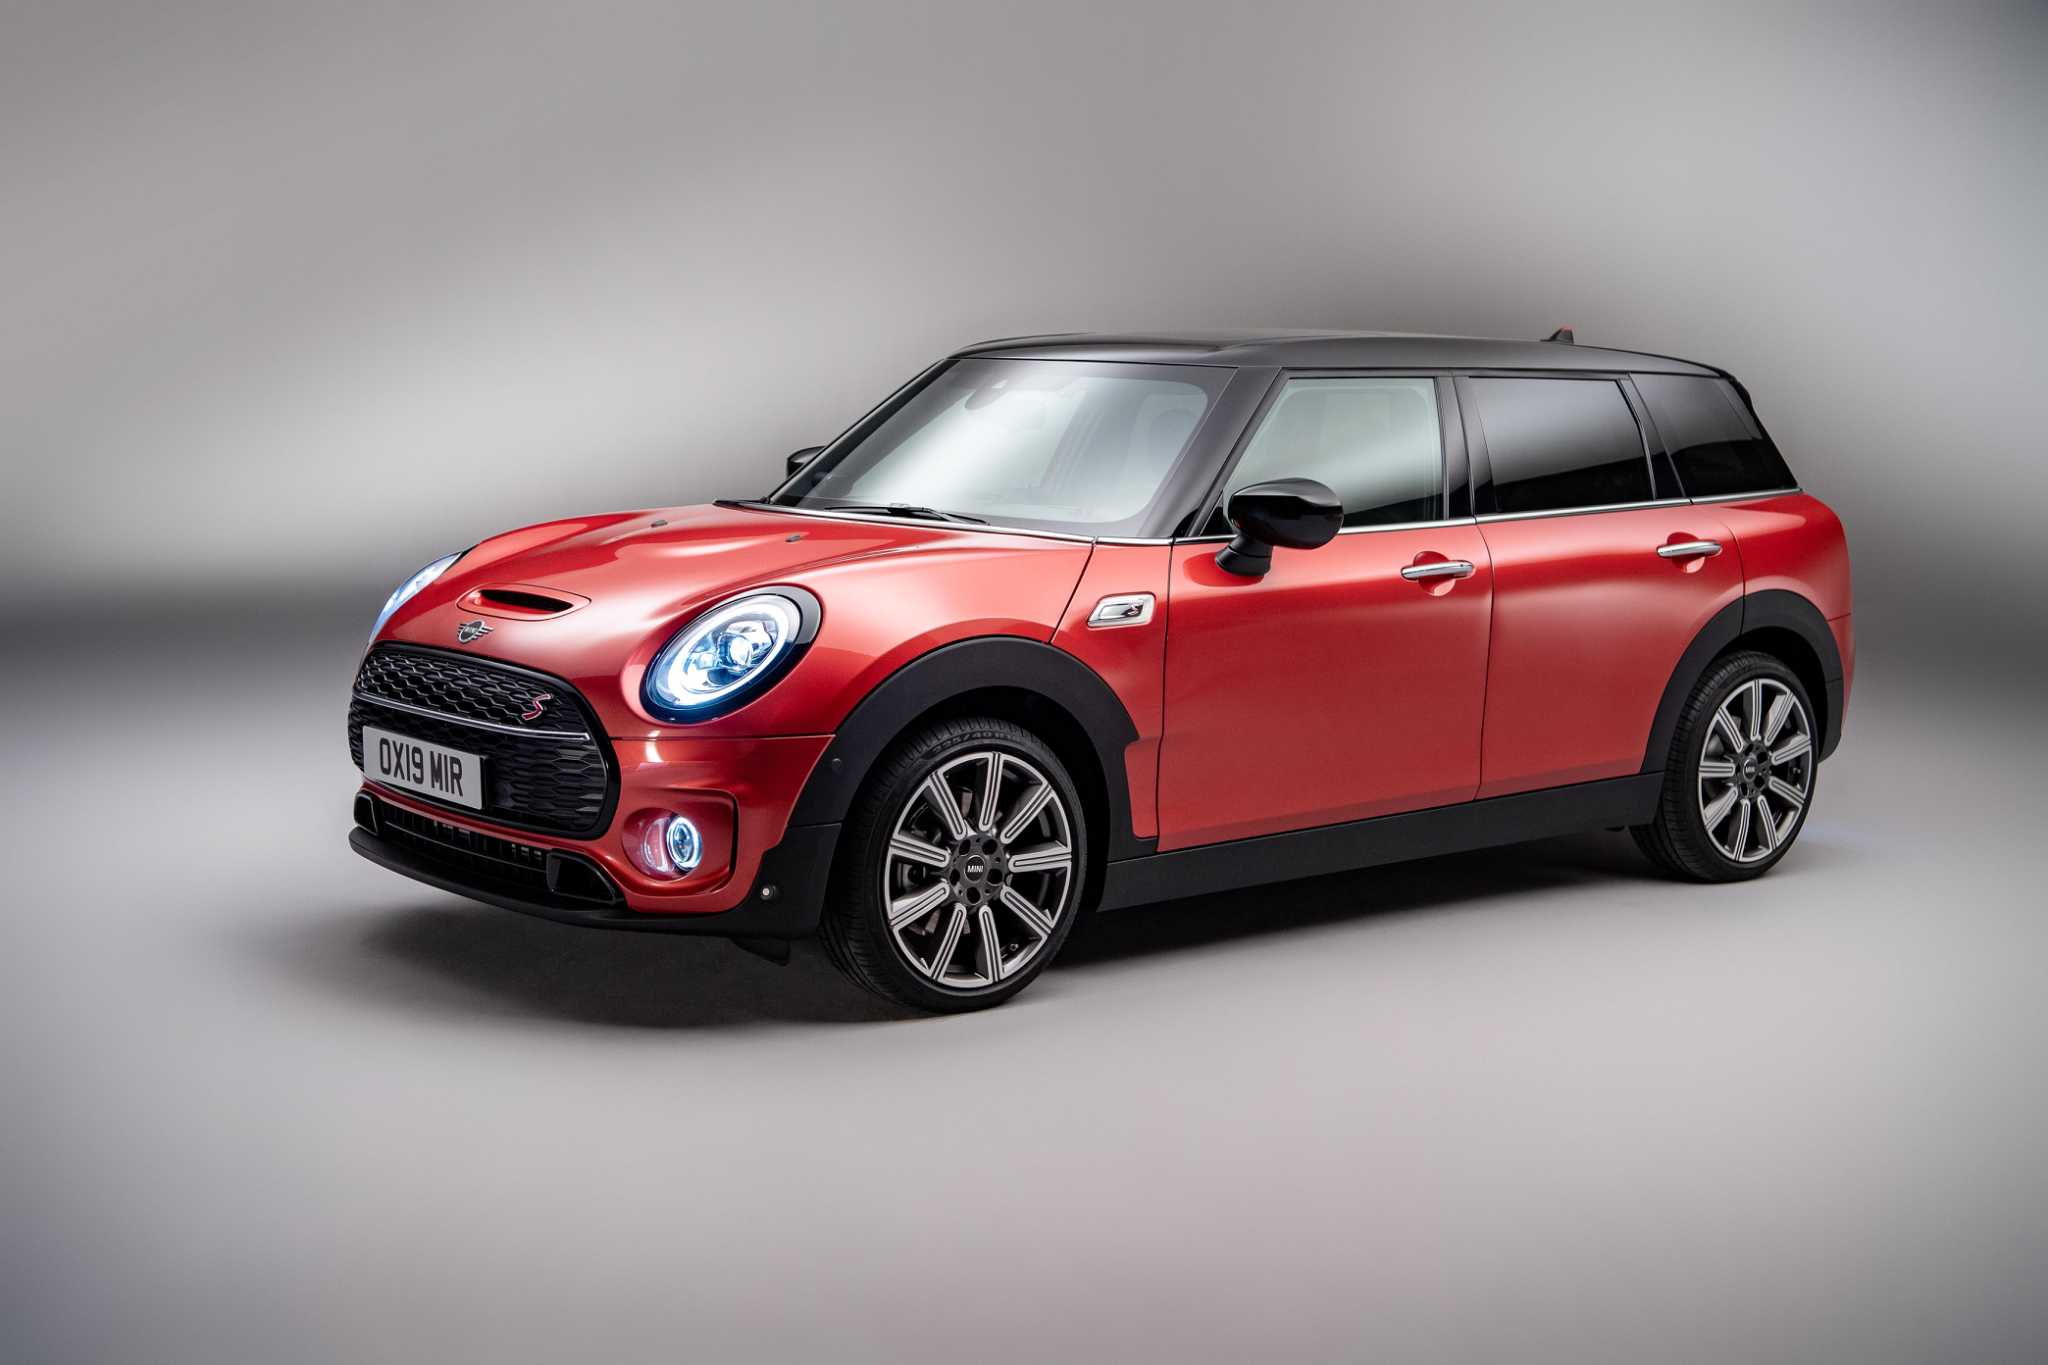 The 2020 MINI Cooper S Clubman offers graceful travel